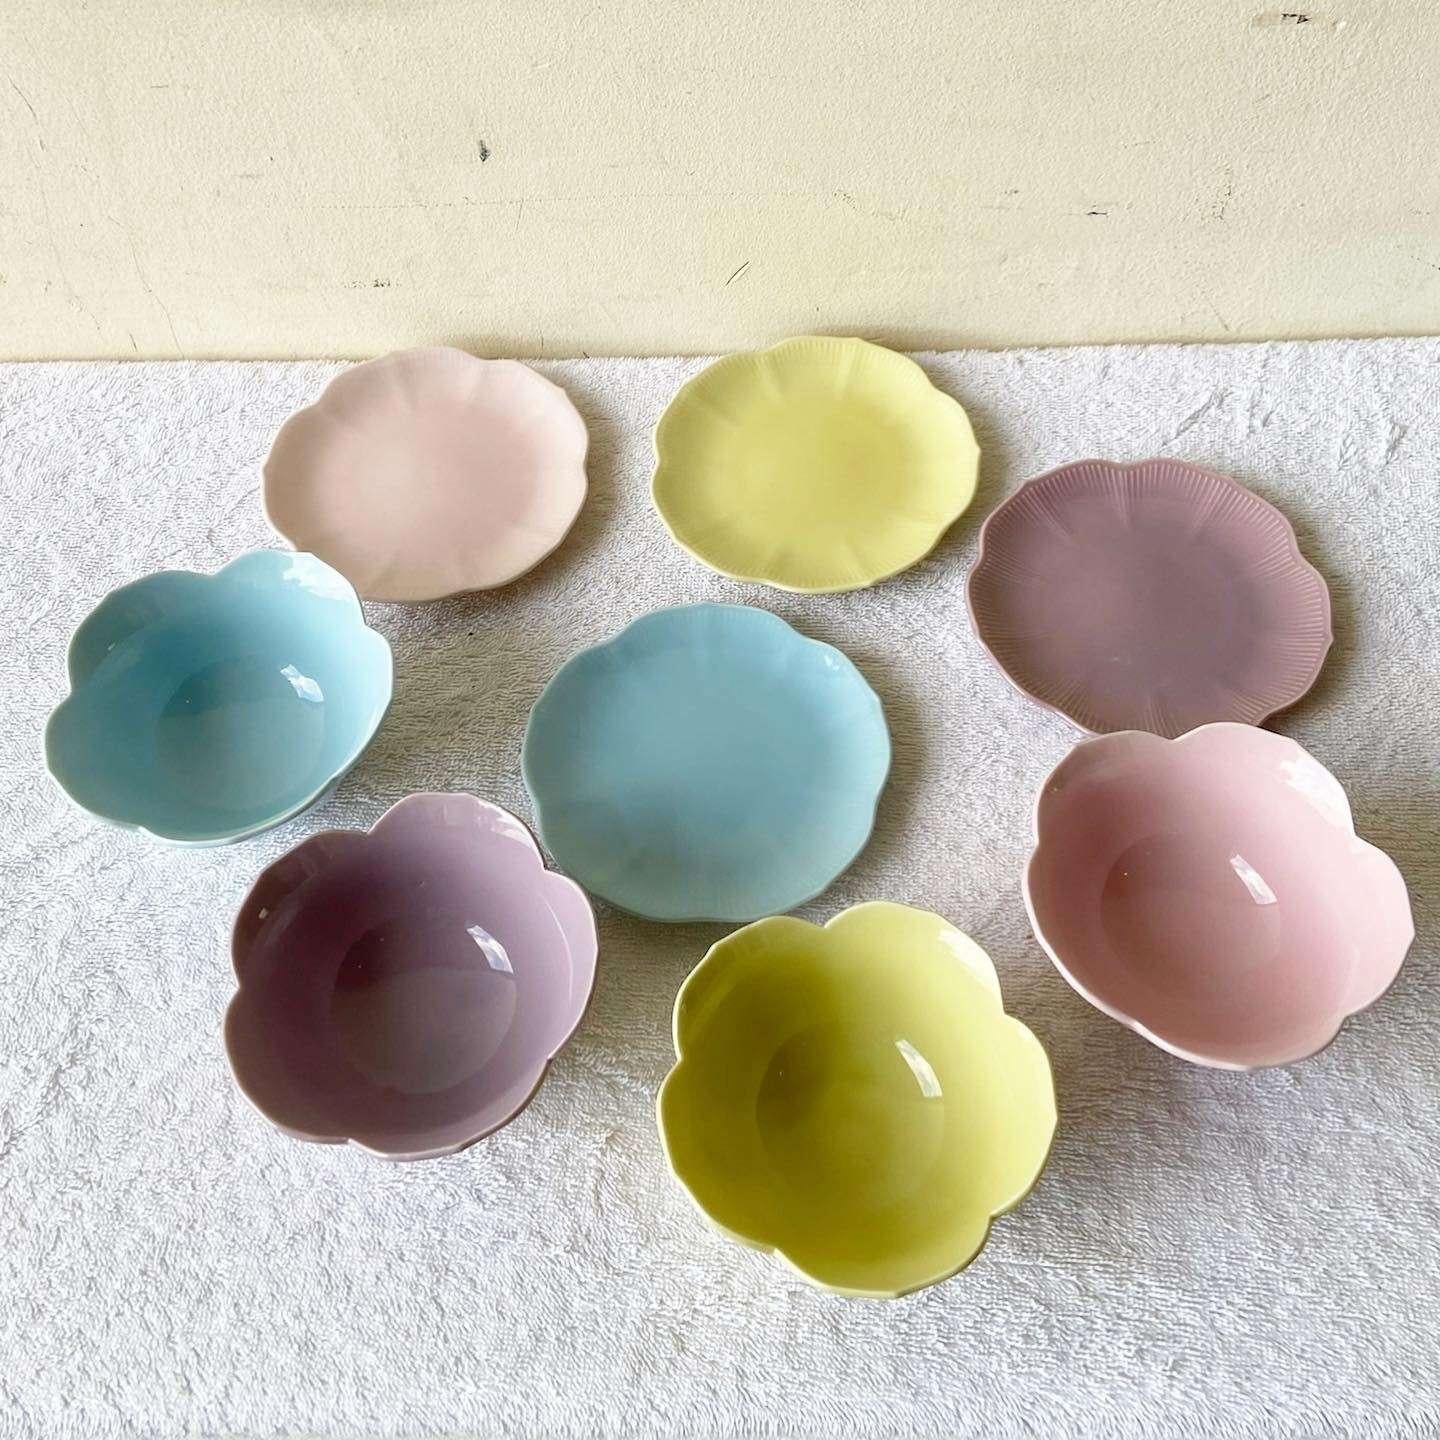 Purple, Pink, Blue and Yellow Lillian Venon Lotus Bowls and Saucers, 8 Pieces In Good Condition For Sale In Delray Beach, FL